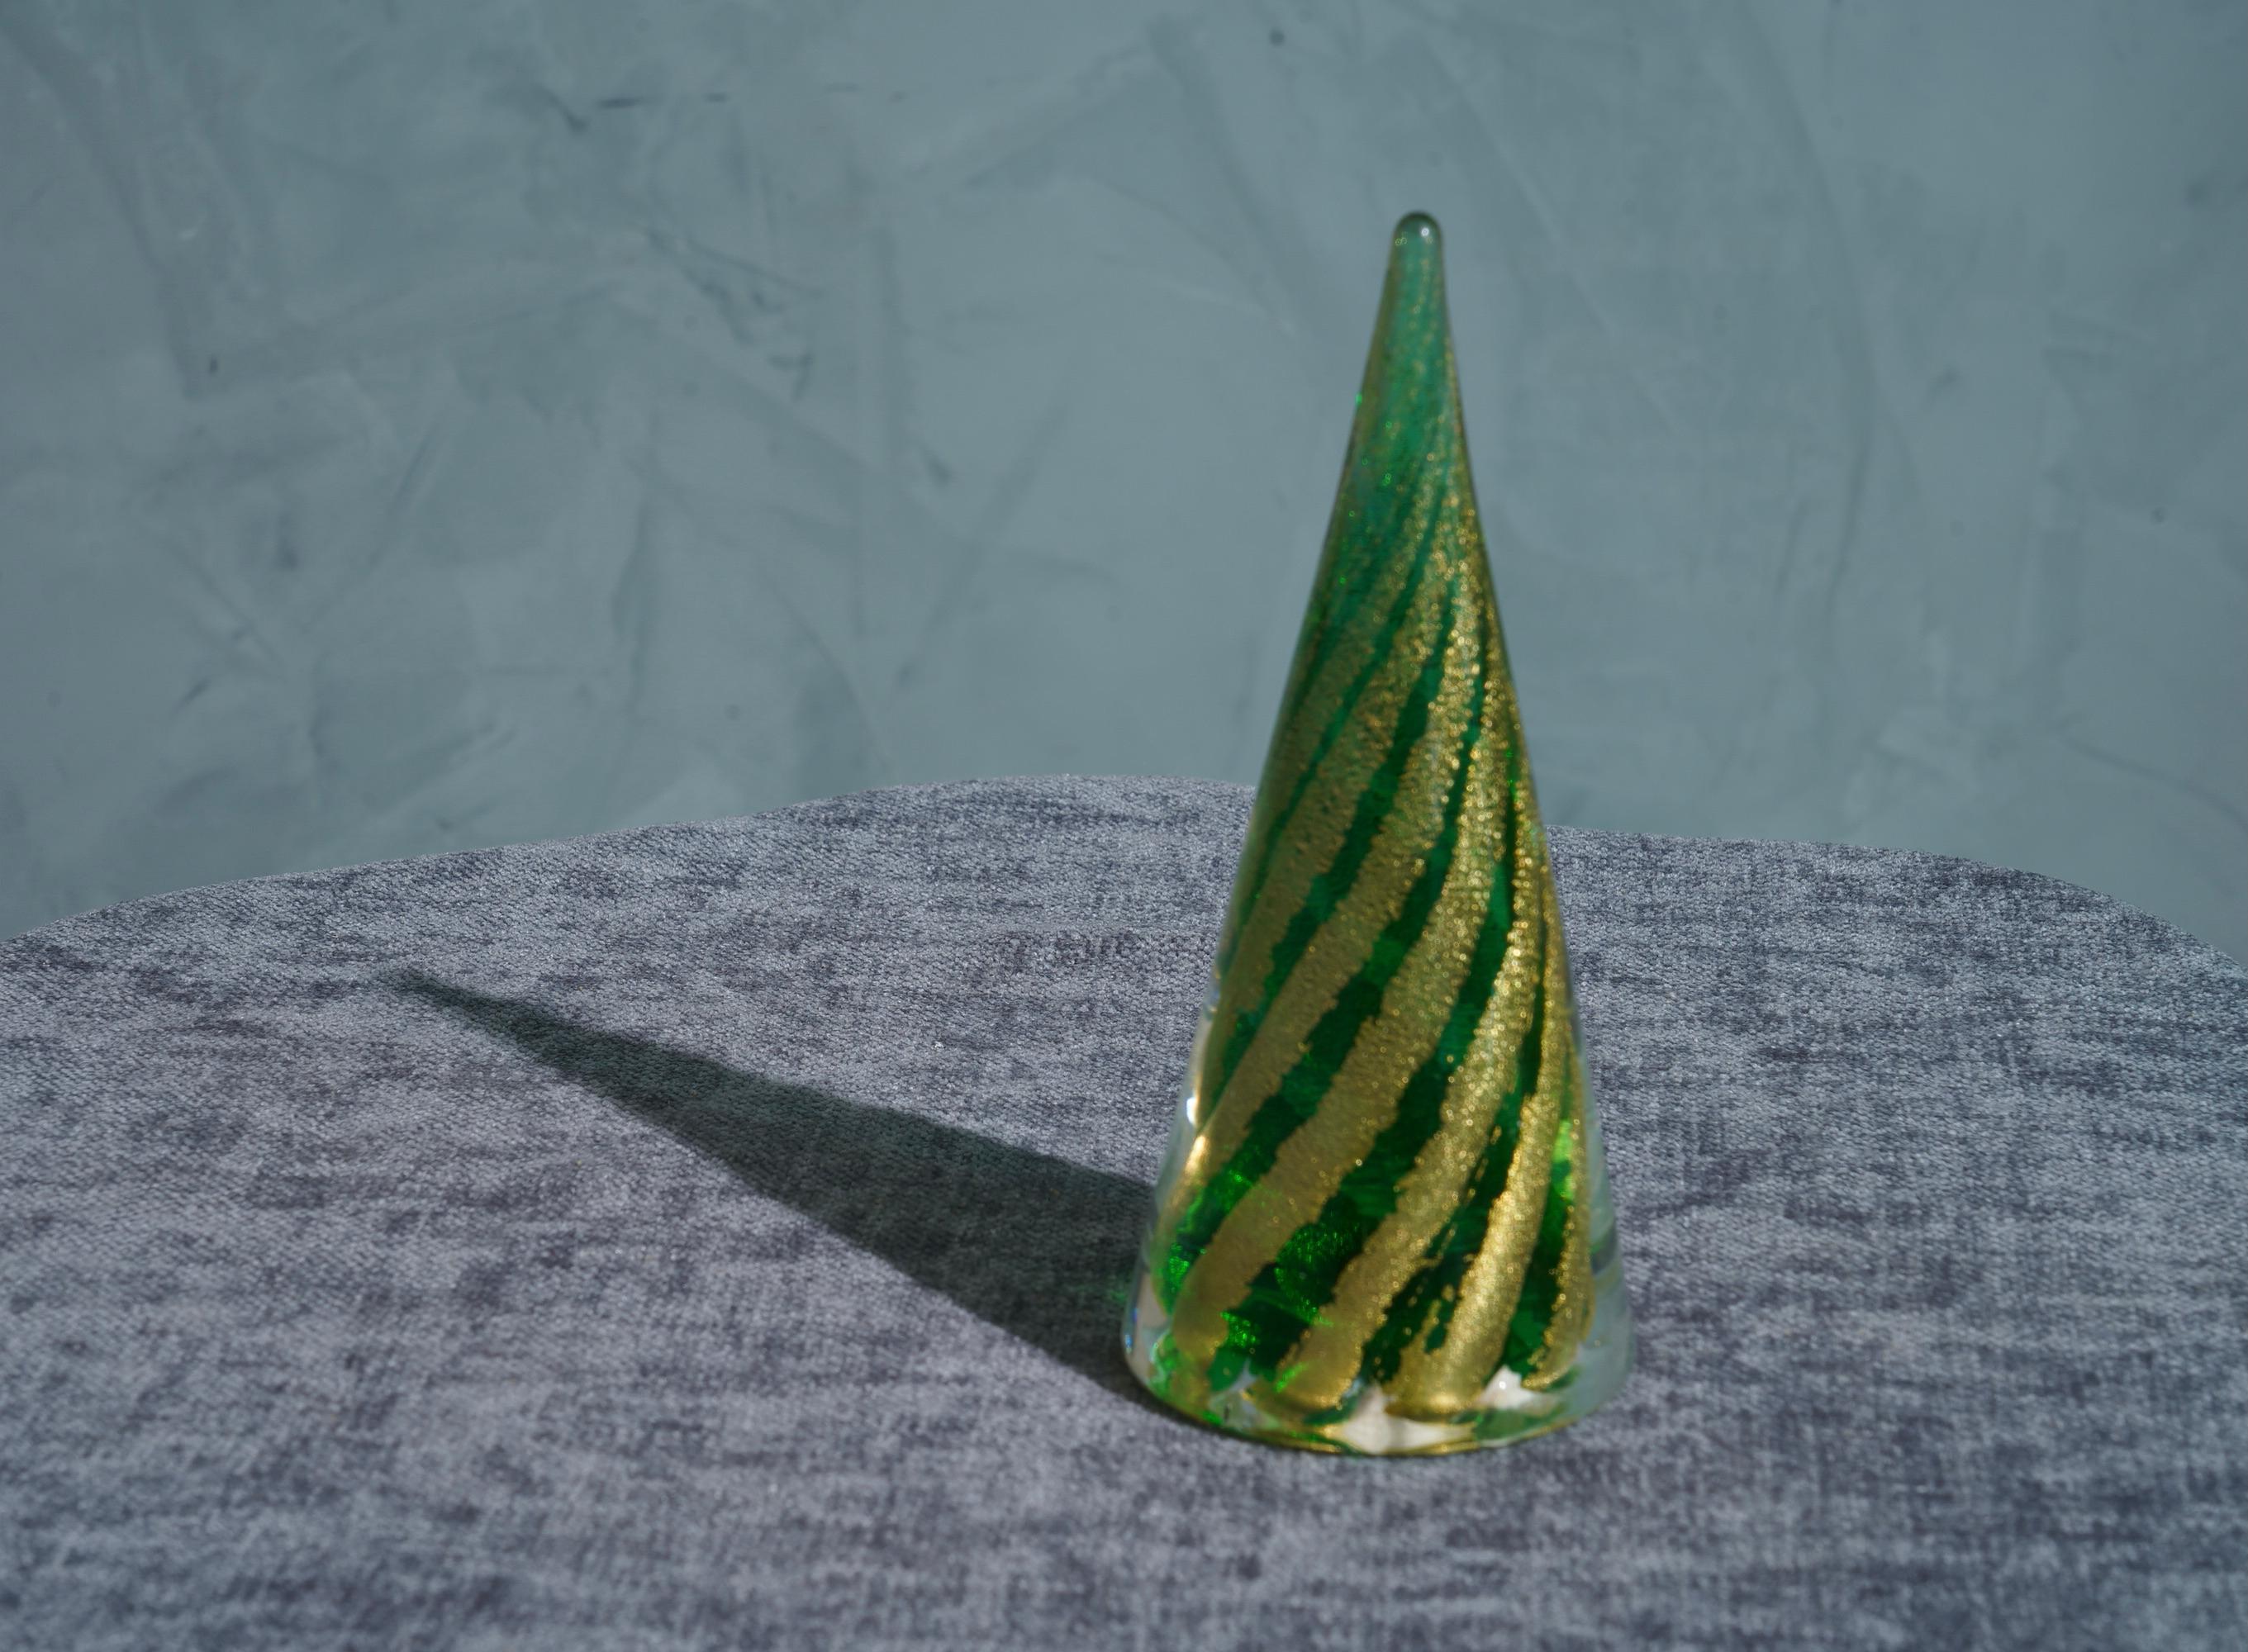 Very particular sculpture of Tree in Murano glass, stylized and linear like the art of glass in Venice commands.

The sculpture represents a stylized Christmas tree in green and gold. You can see from the photos the intense green color and the